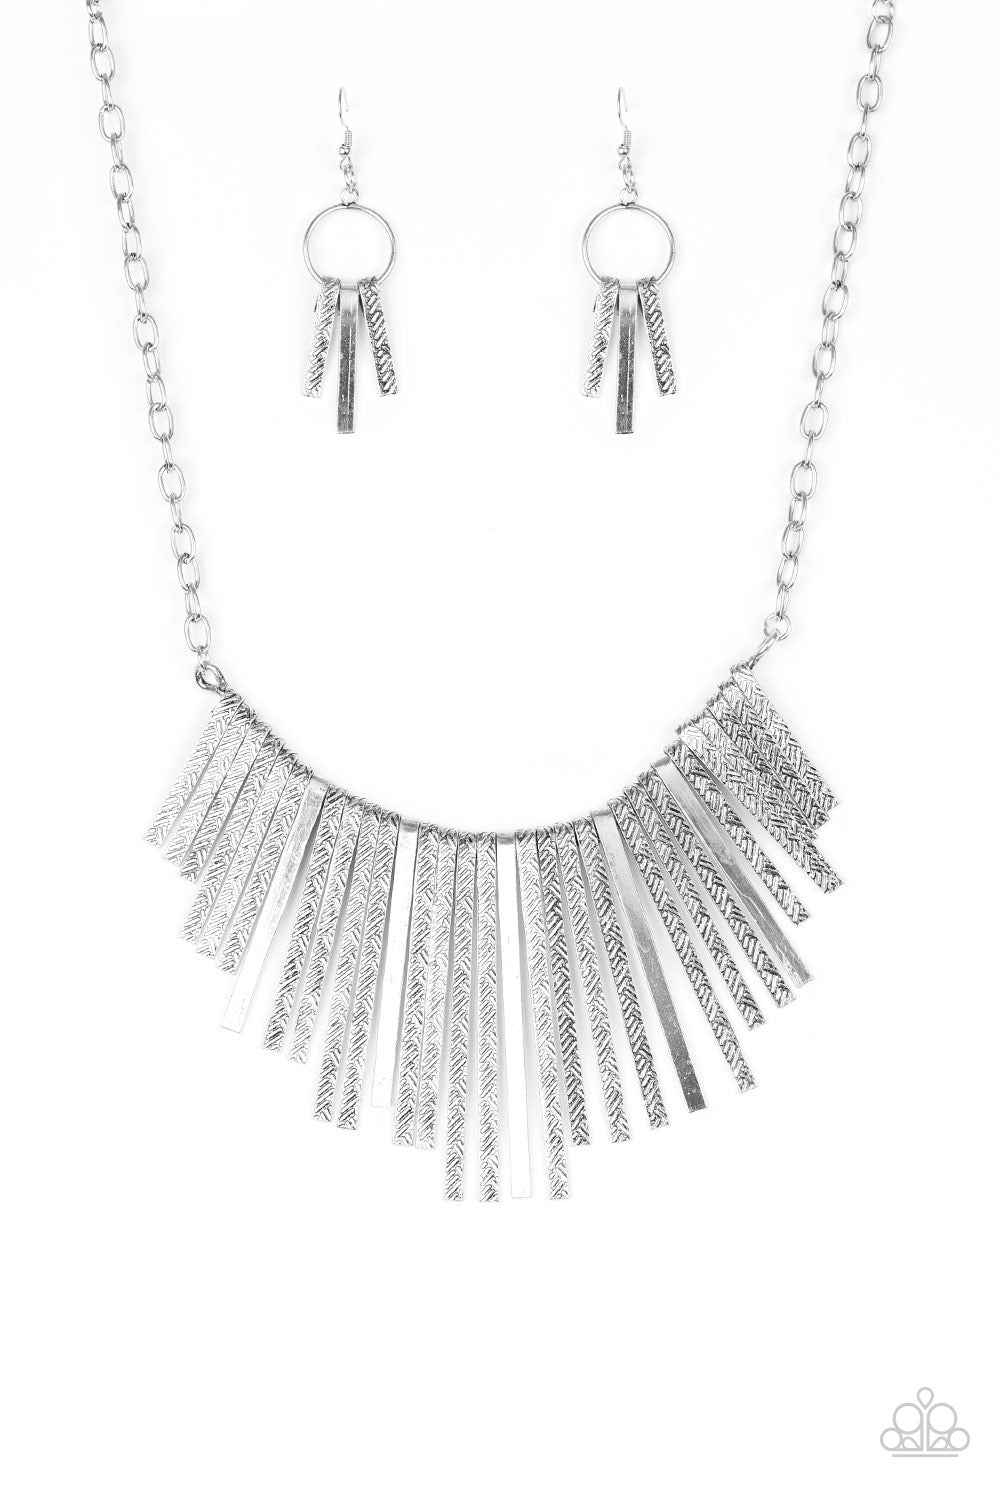 Paparazzi Accessories Welcome to the Pack - Silver Necklaces - Lady T Accessories